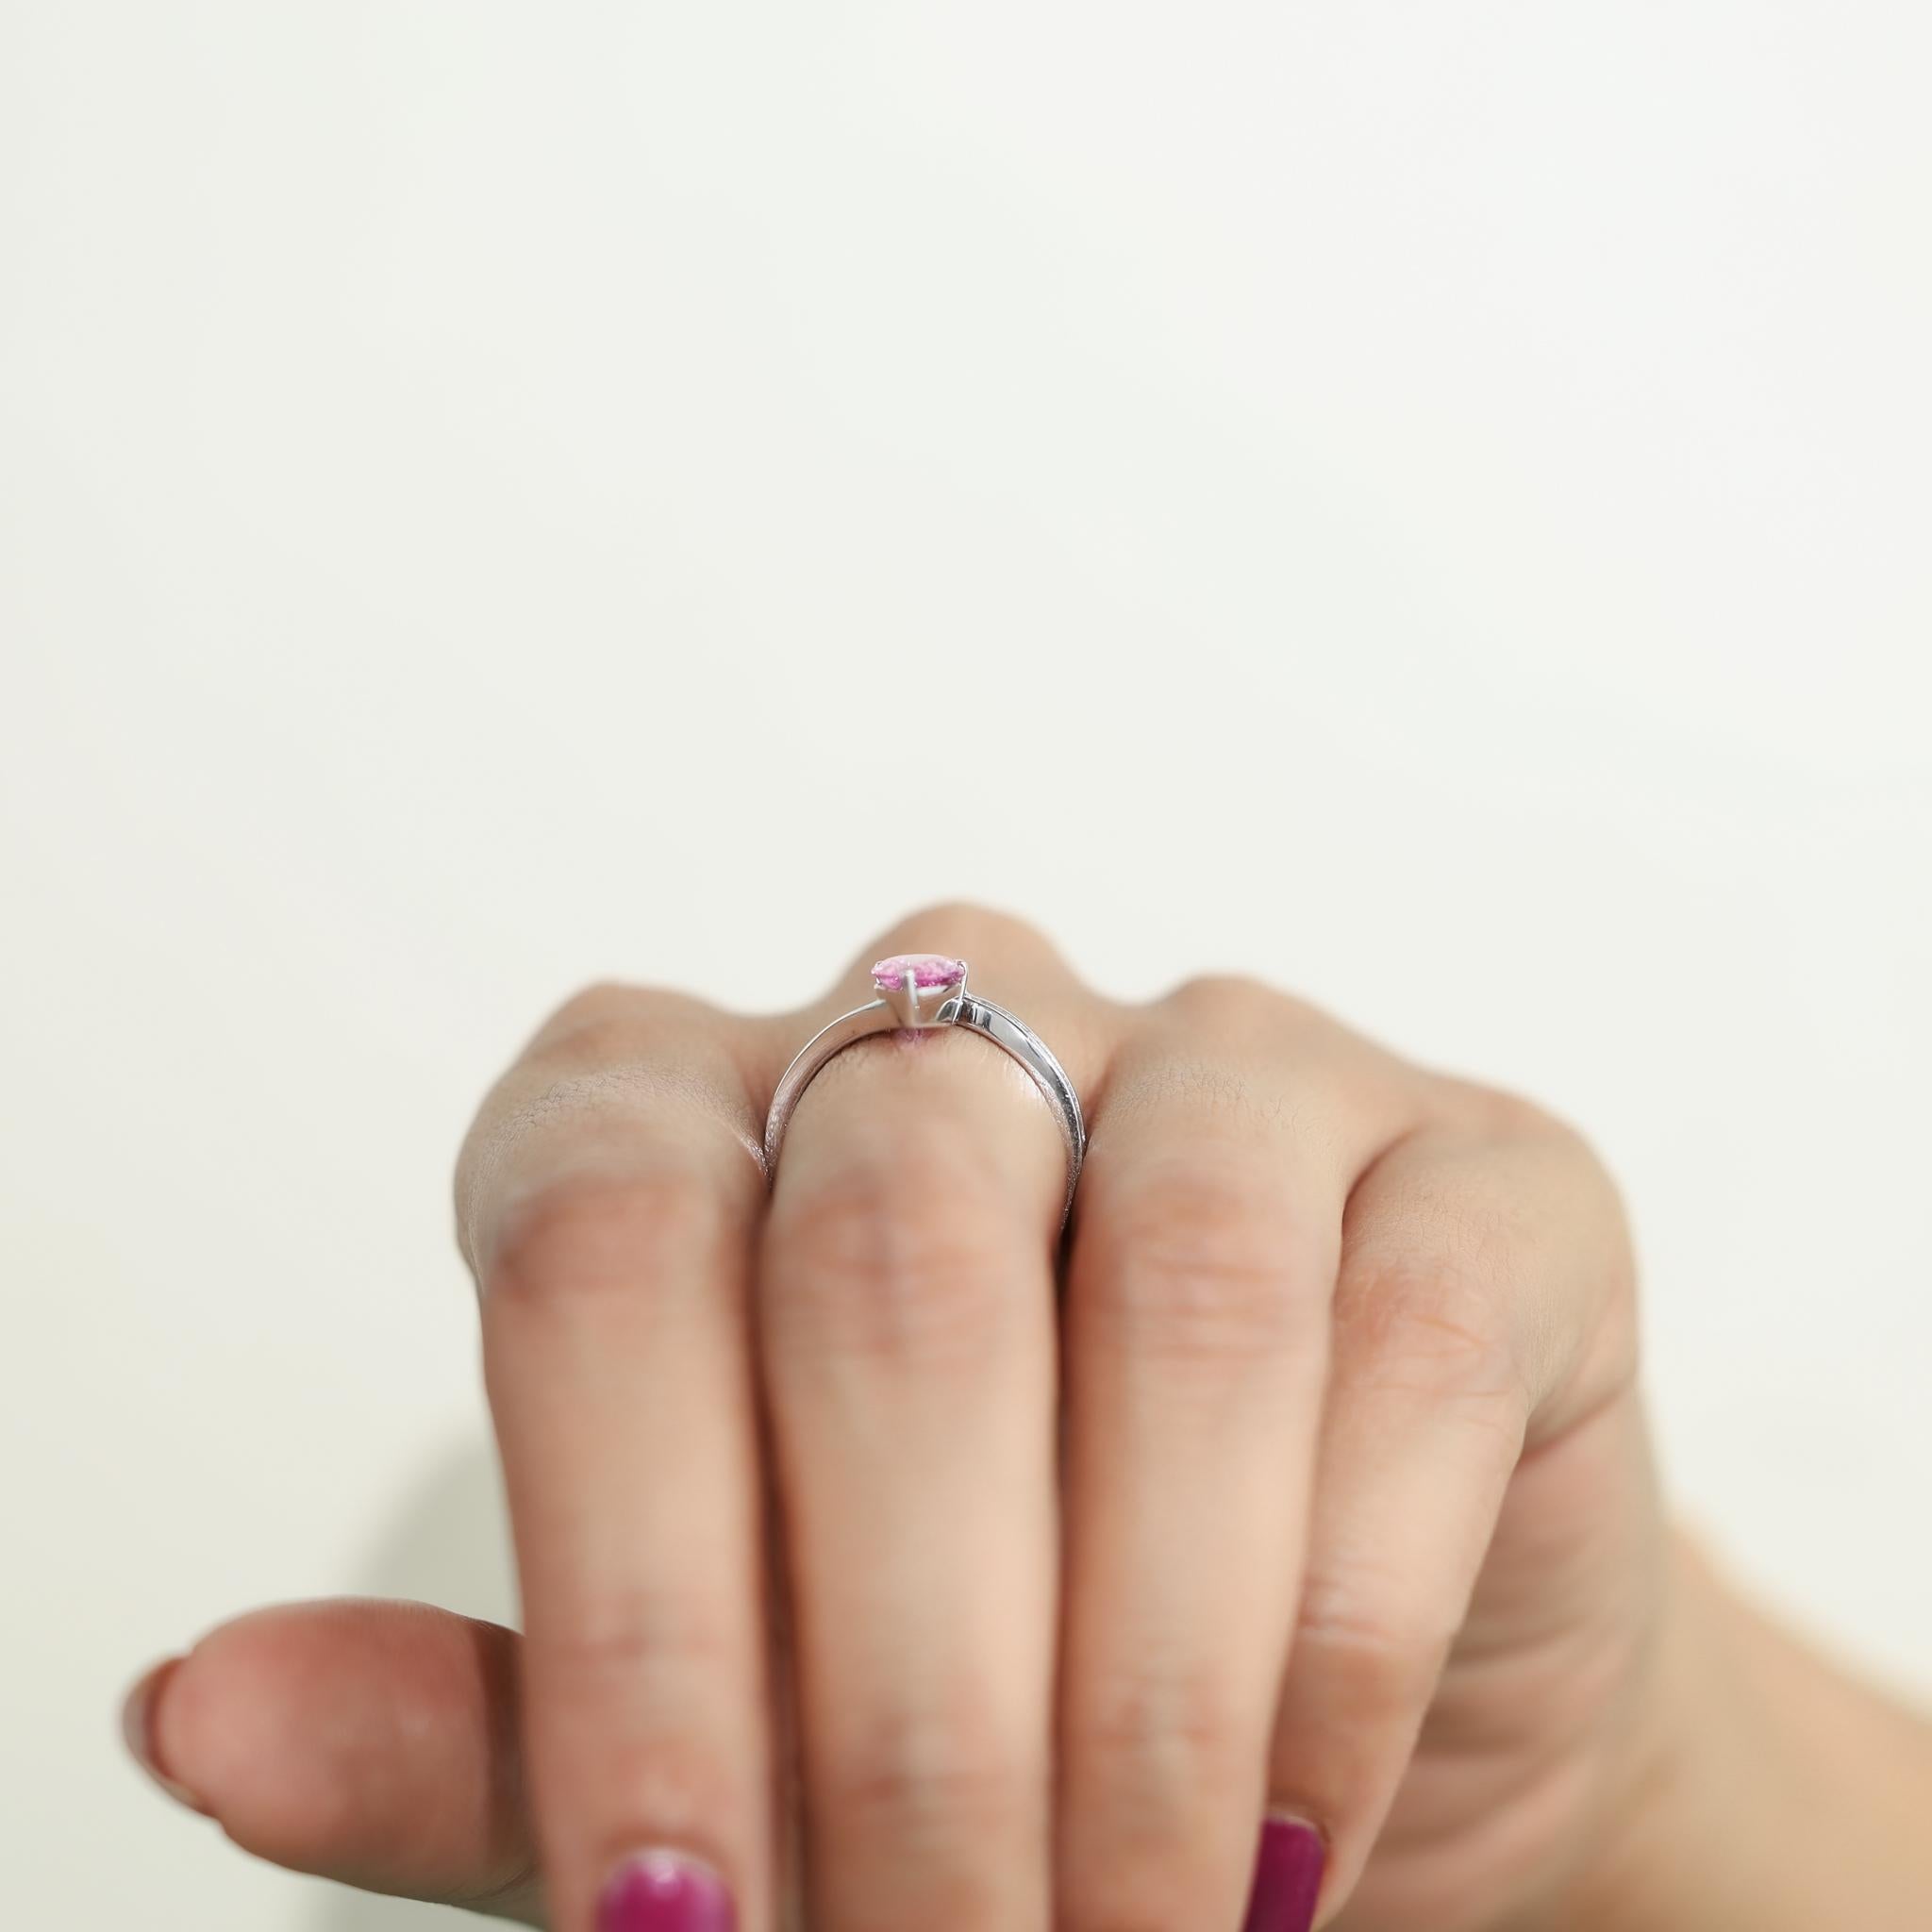 1.5 Carat Pear Pink Sapphire Diamond Cocktail Engagement Ring in 18k White Gold en vente 5